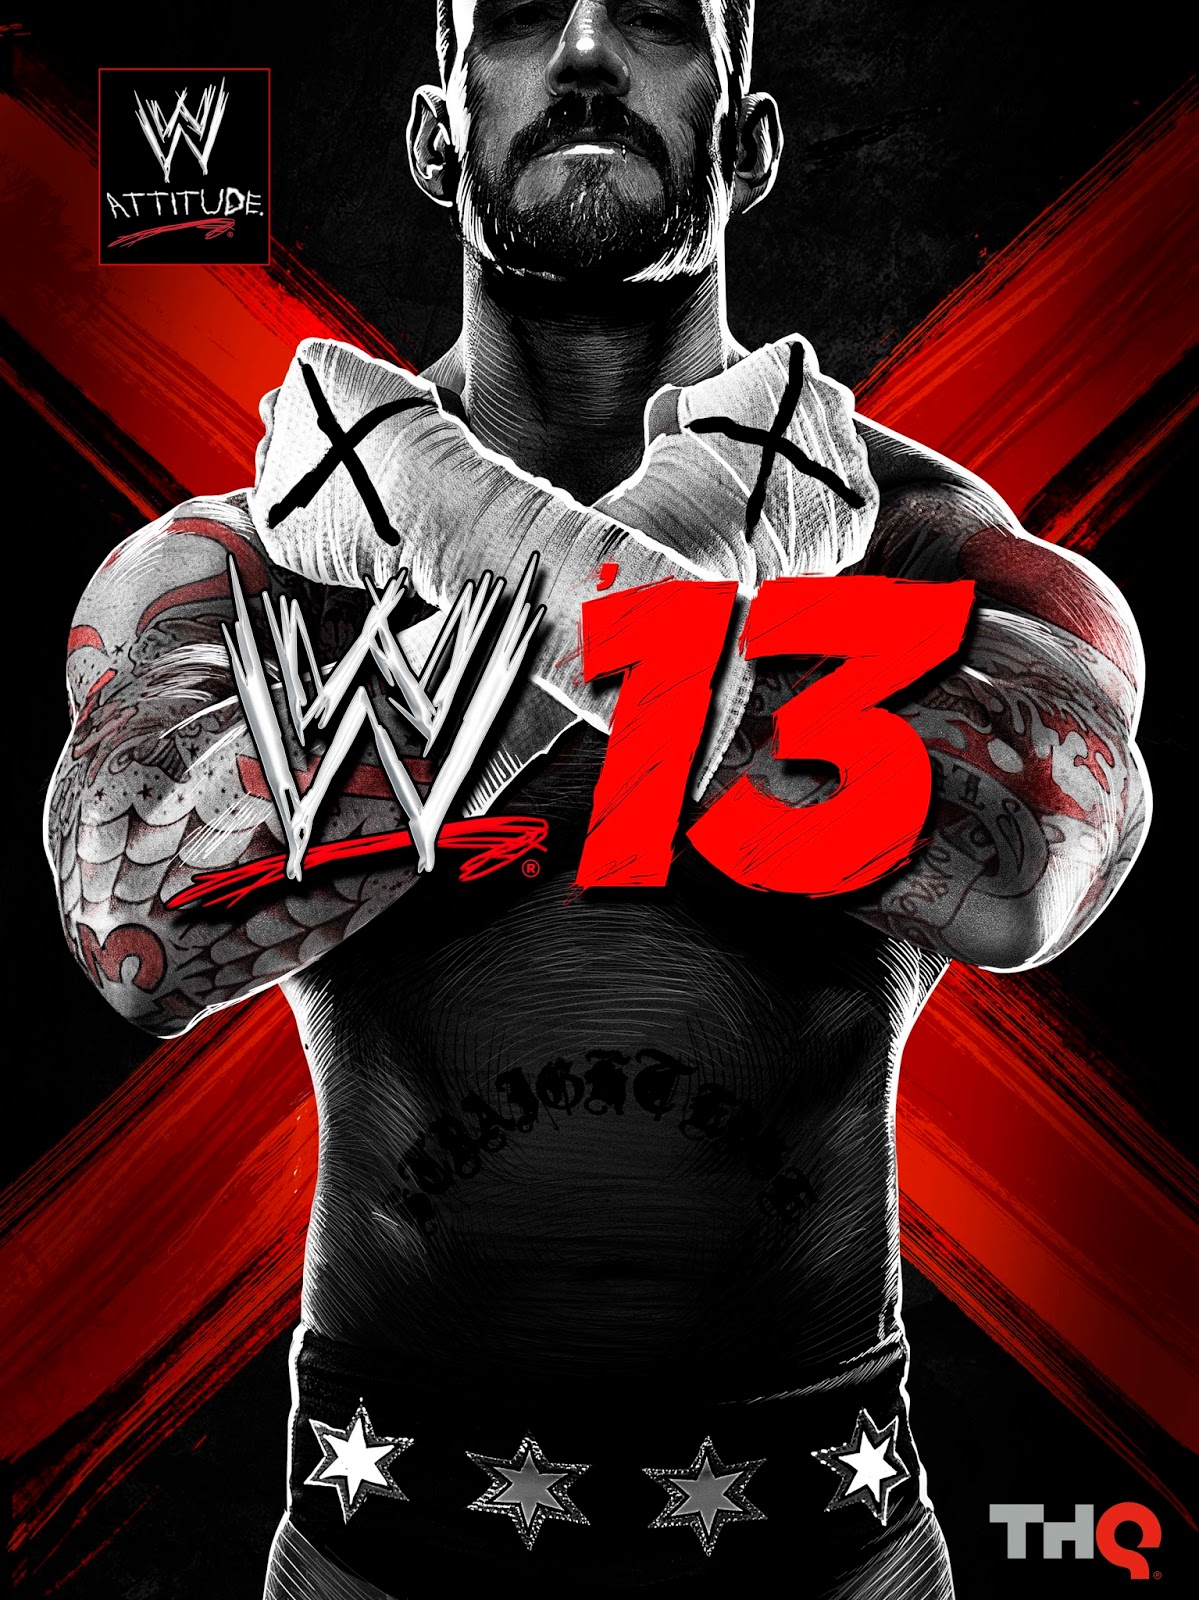 wwe 2k13 pc requirements for Windows xp